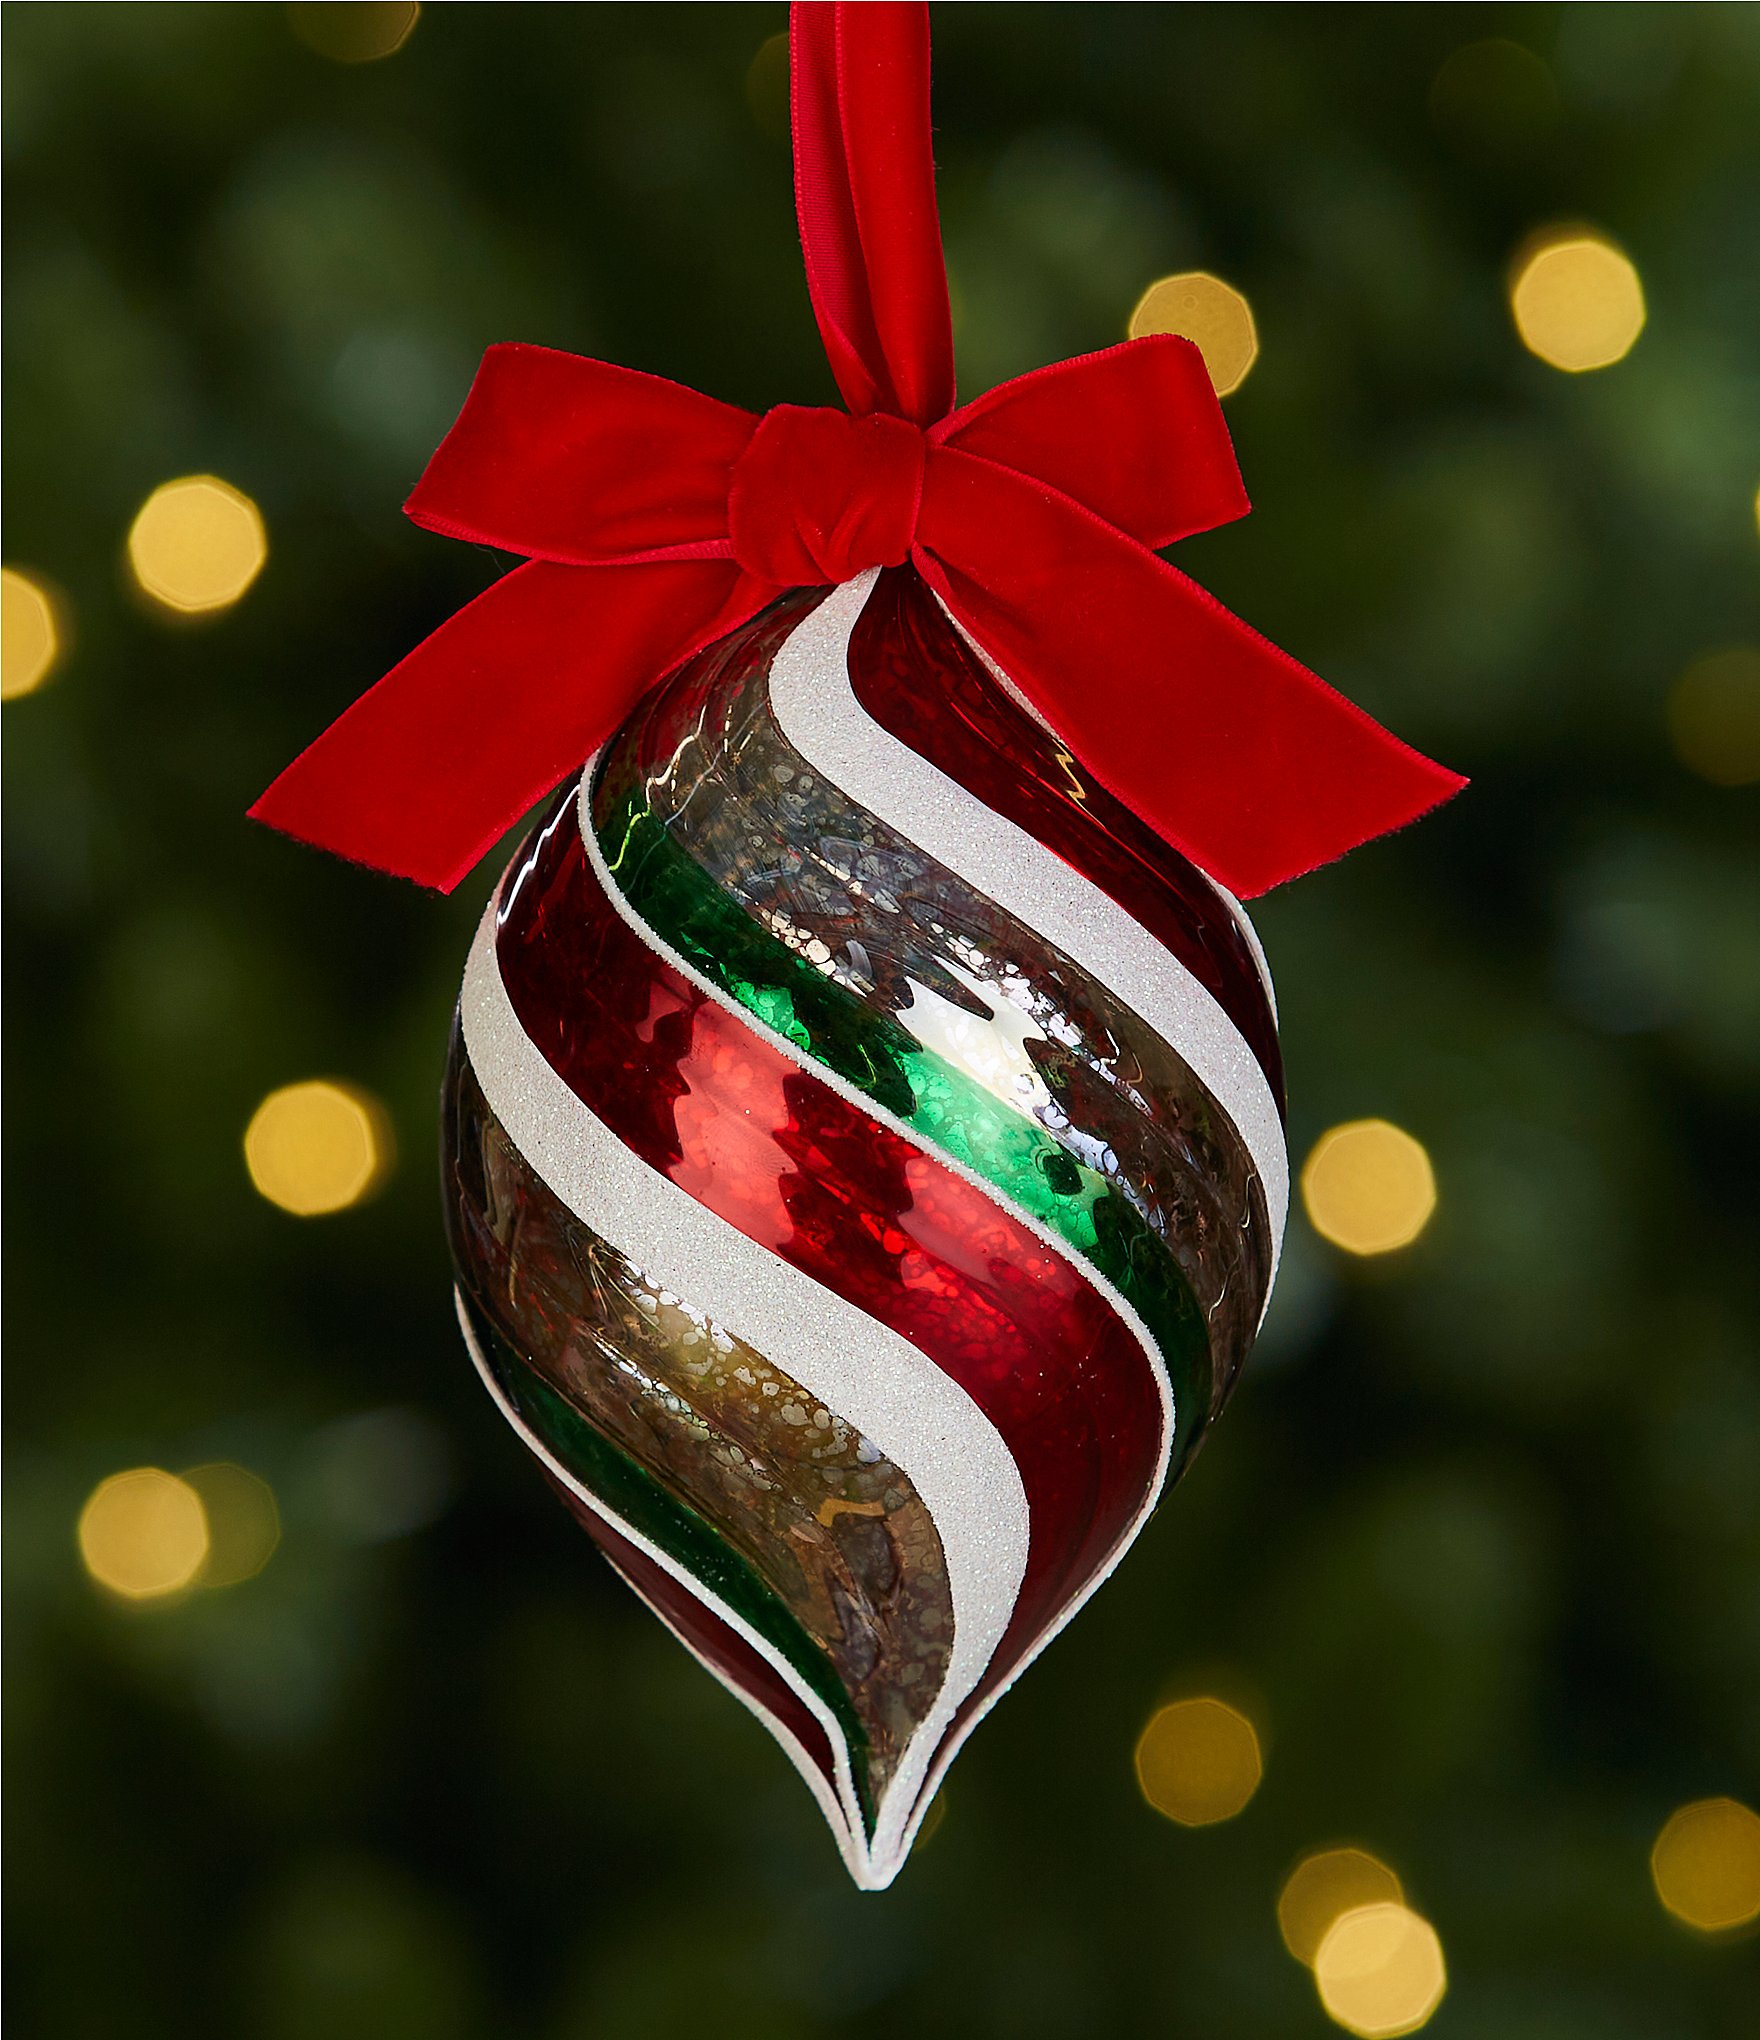 Ornament, glass / enamel / velveteen ribbon / gold-finished copper / brass  / steel, clear and multicolored, 3-inch round with hummingbird / flower /  leaf design. Sold individually. - Fire Mountain Gems and Beads